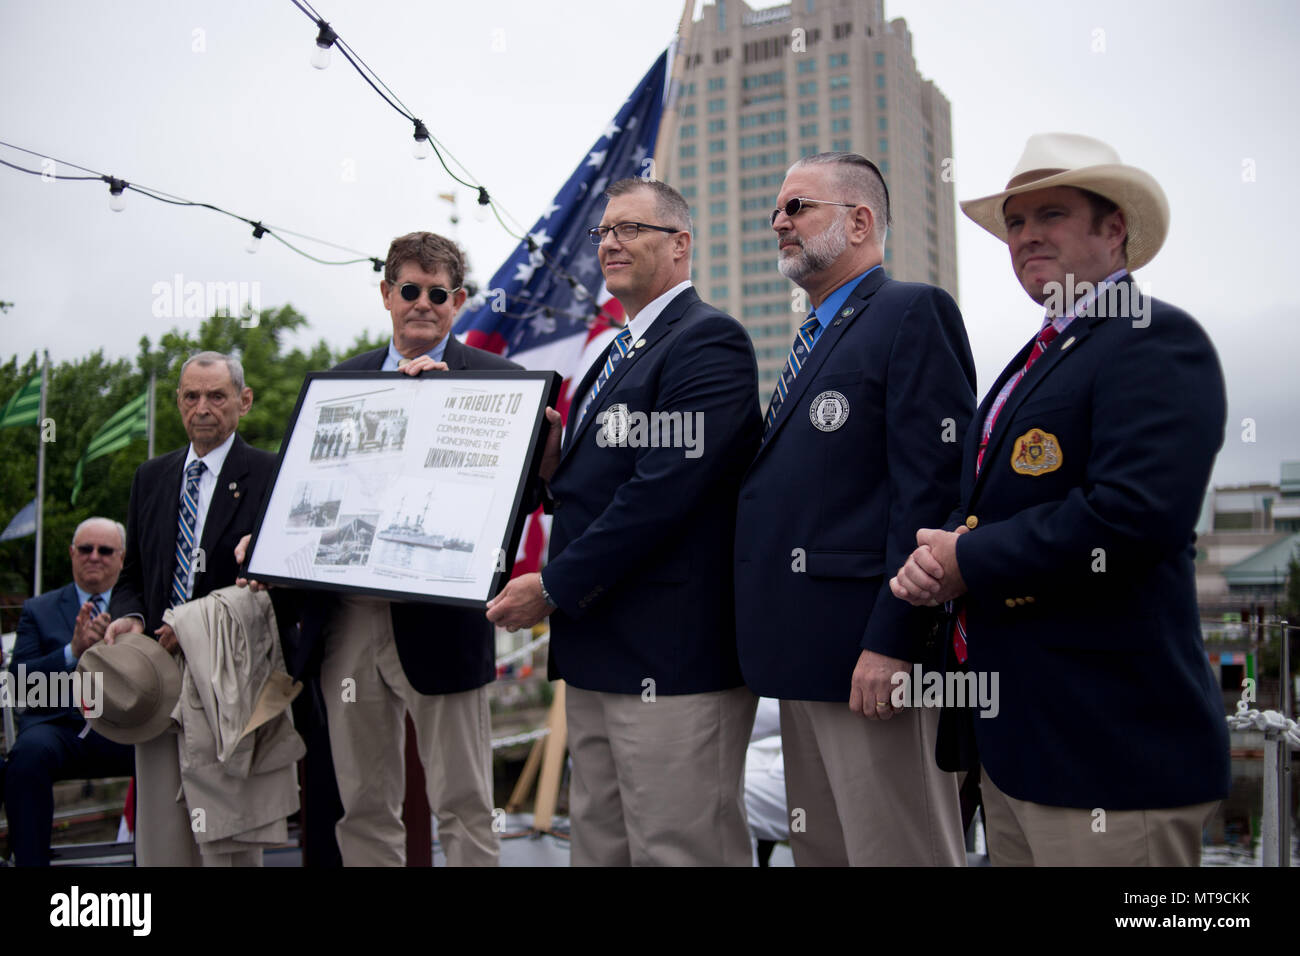 Philadelphia, United States. 28th May, 2018. A presentation is made to the Society of the Honor Guard, Tomb of the Unknown Soldier during the Memorial Day ceremony onboard the retired USS Olympia, which carried home the remains of the Unknown Soldier interred at Arlington National Cemetery from France in 1921. Credit: Michael Candelori/Pacific Press/Alamy Live News Stock Photo